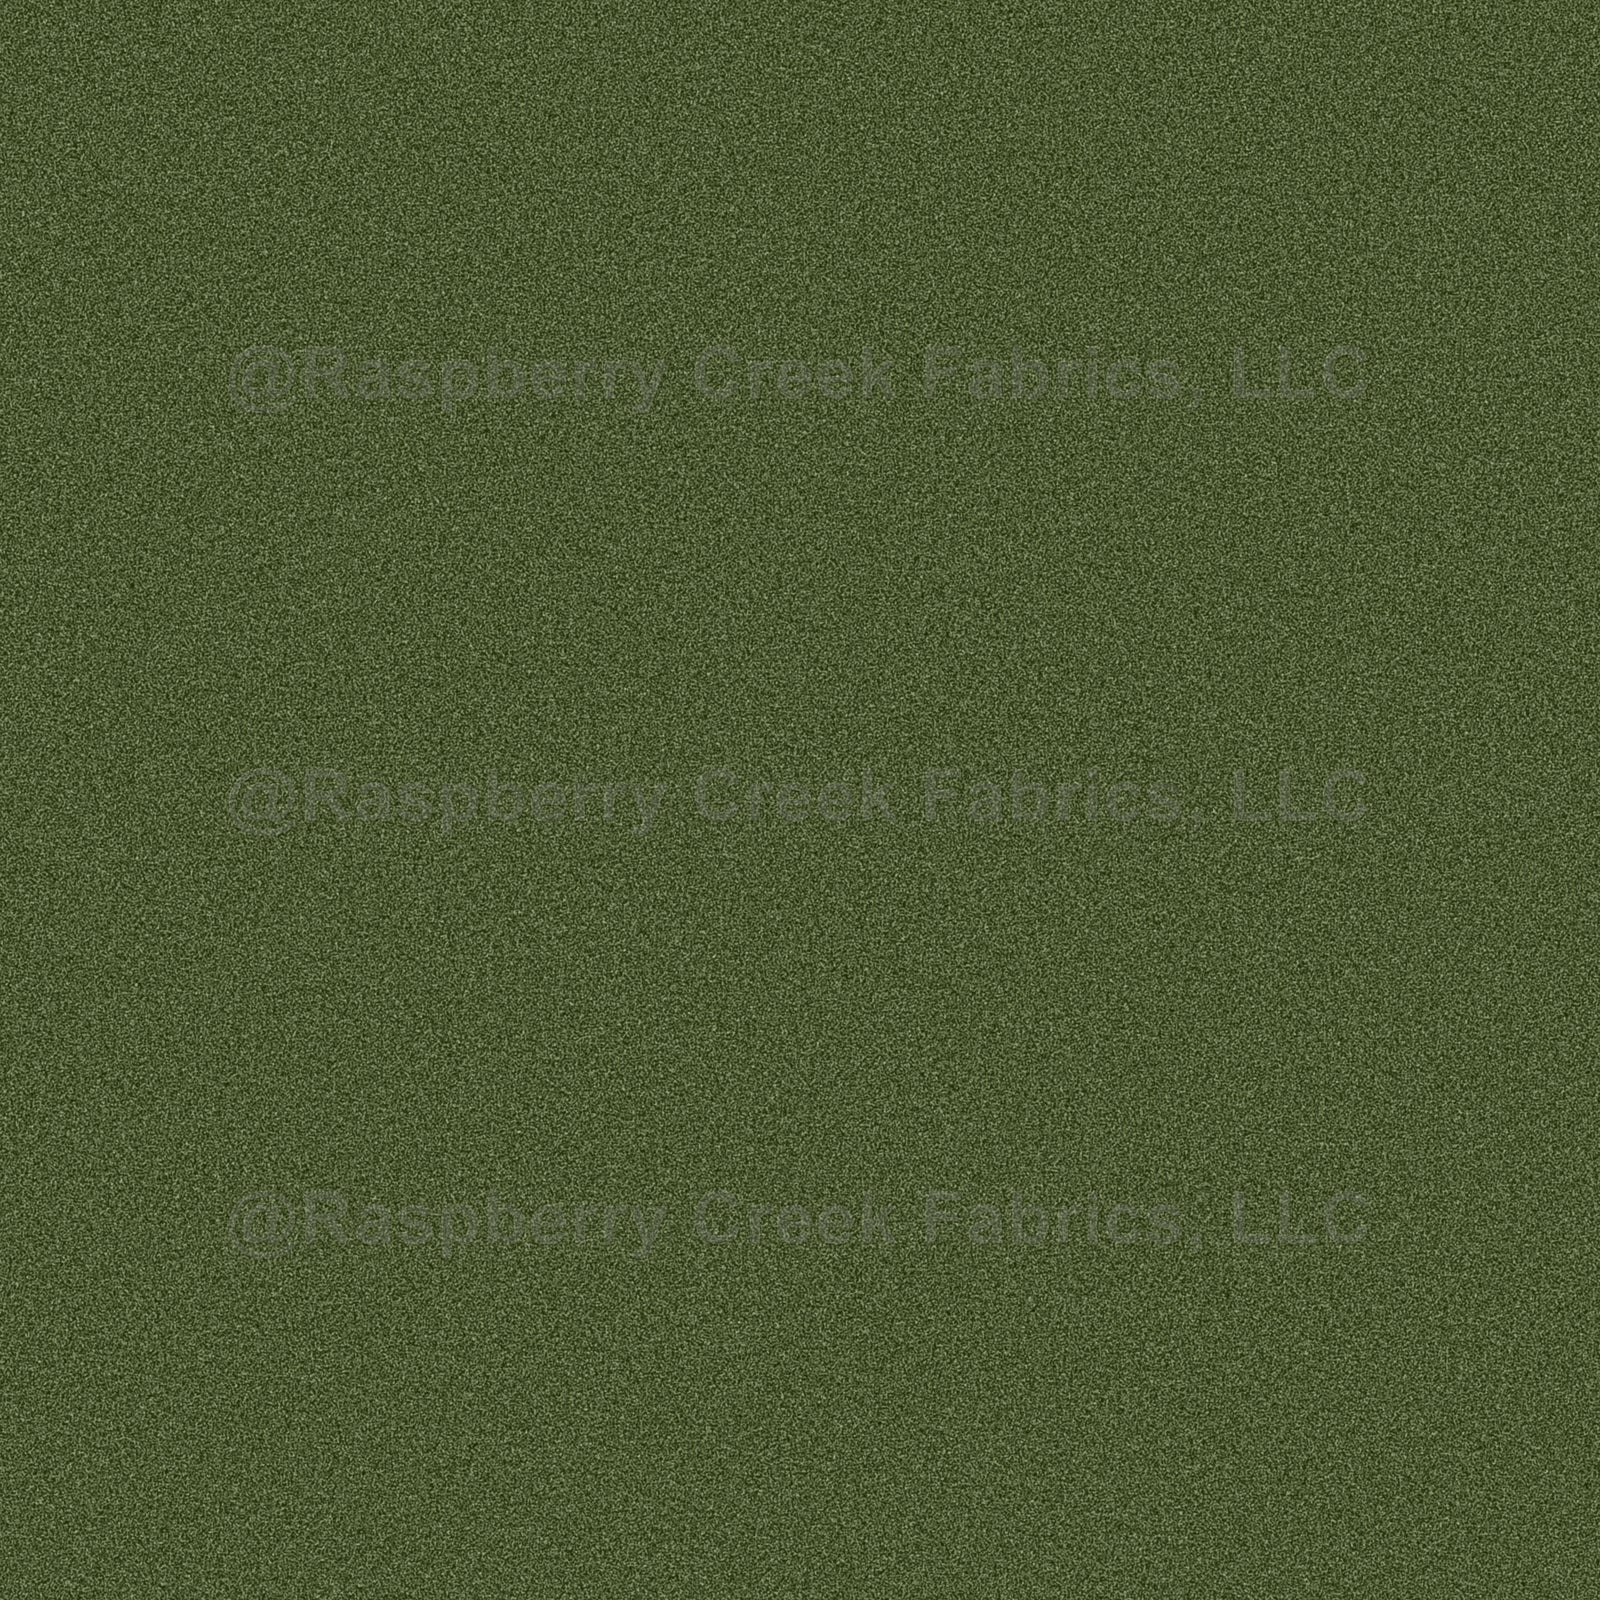 OLIVE green speckled mottled heathered texture SOLID COLOR Fabric